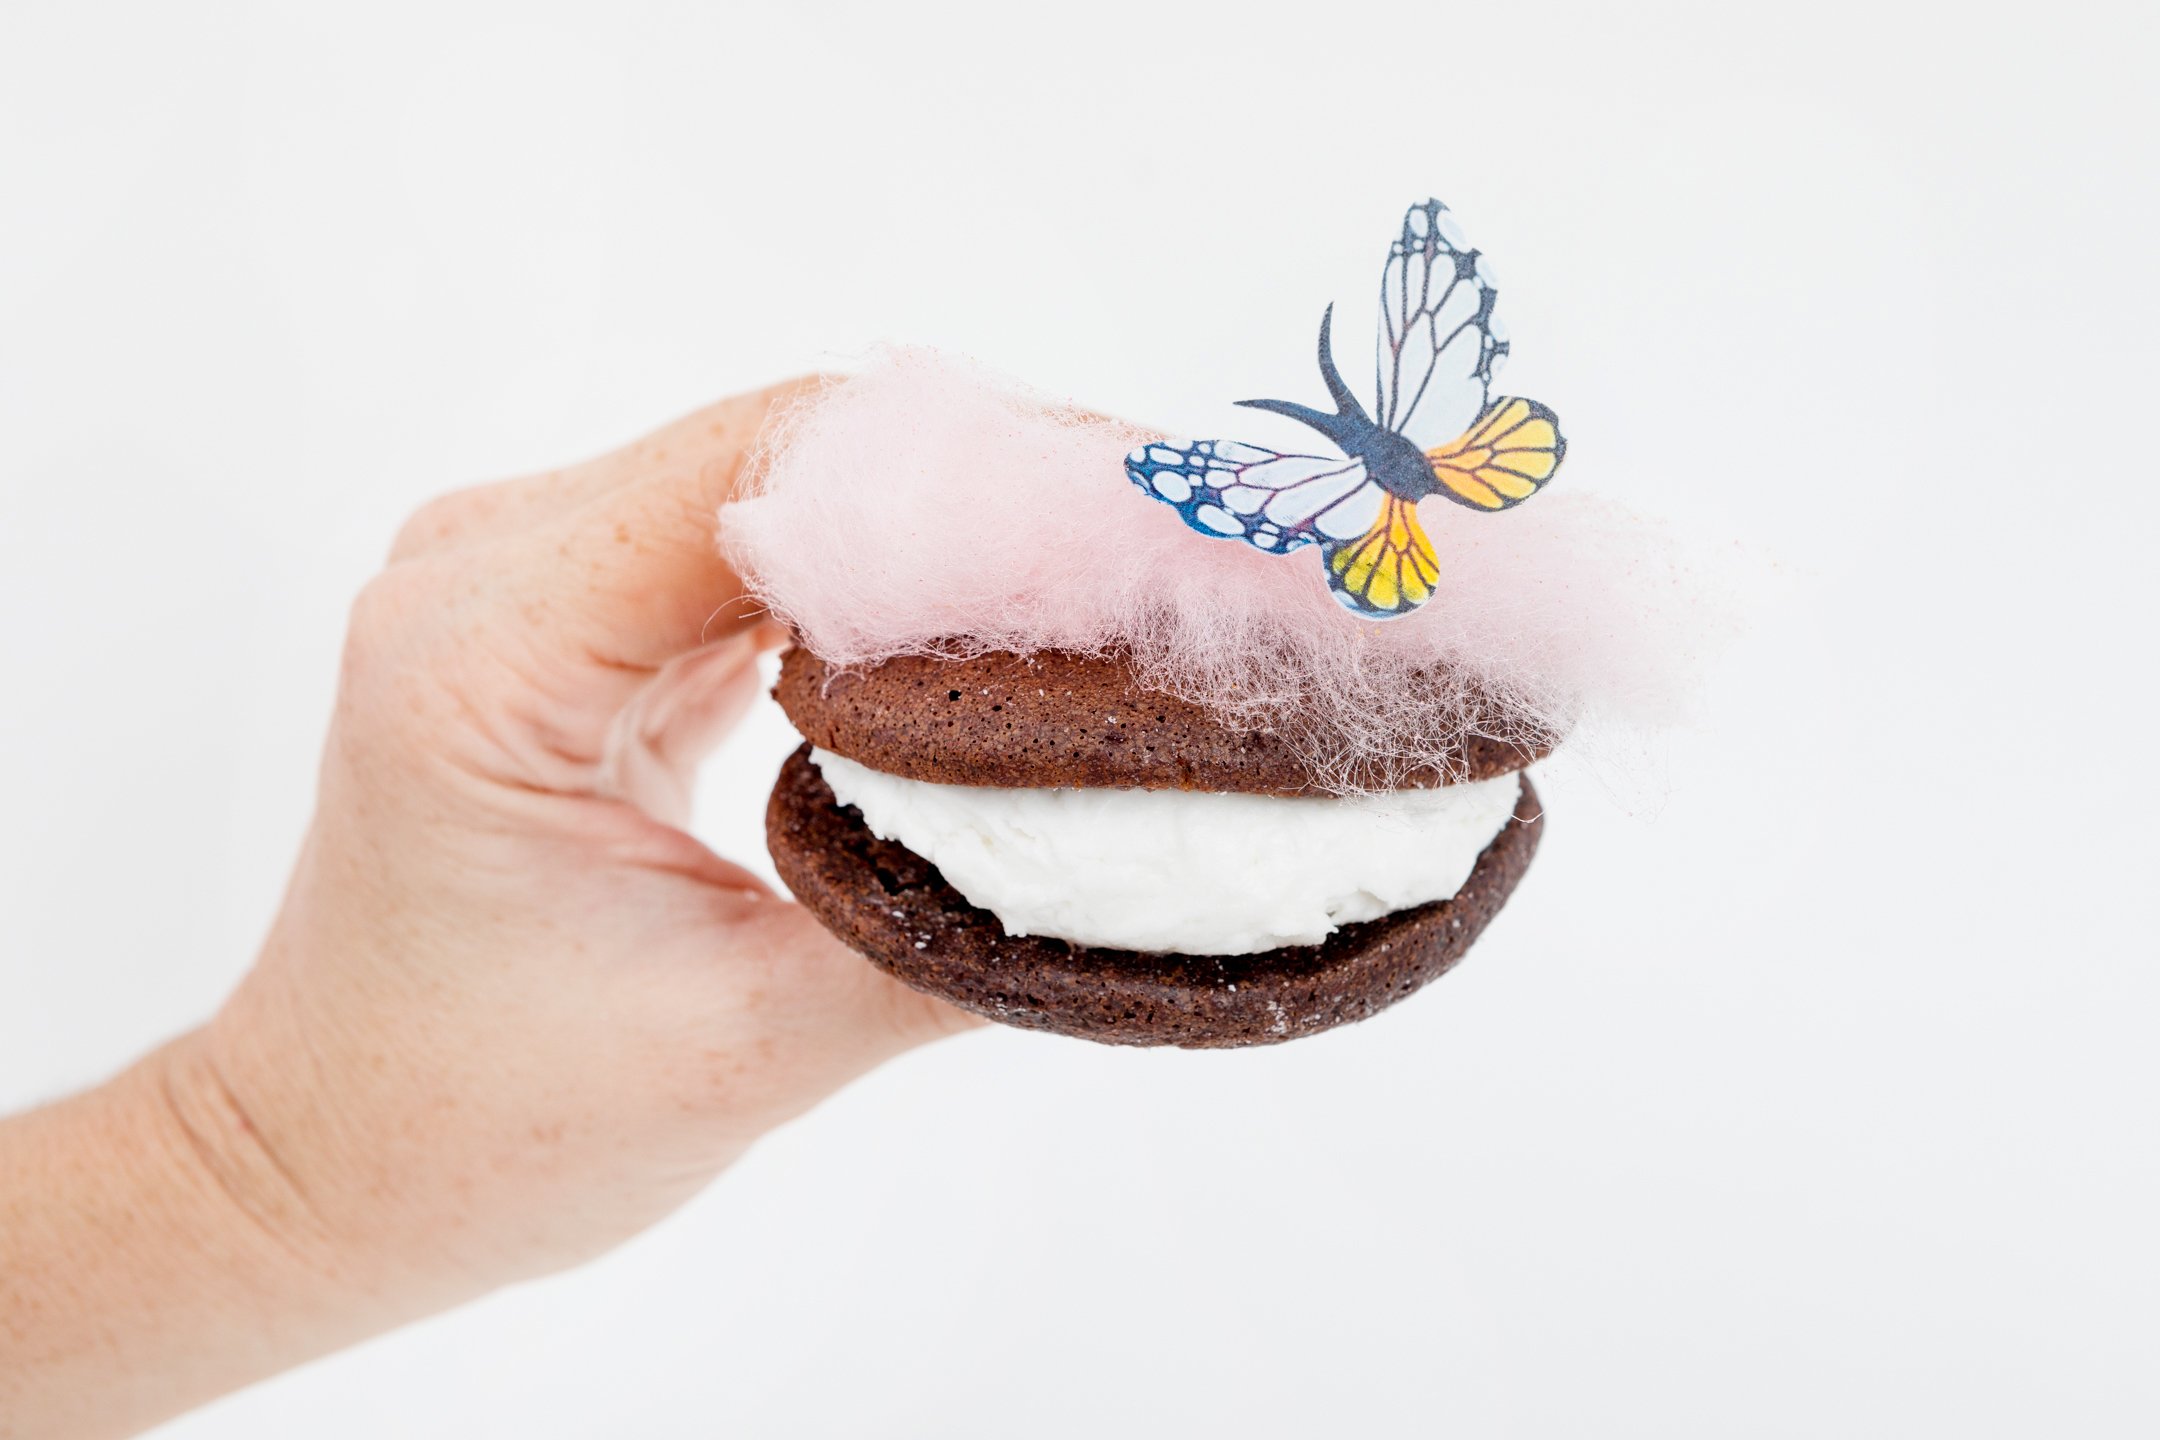 A whoopie pie with cotton candy from our Boston cotton candy cart